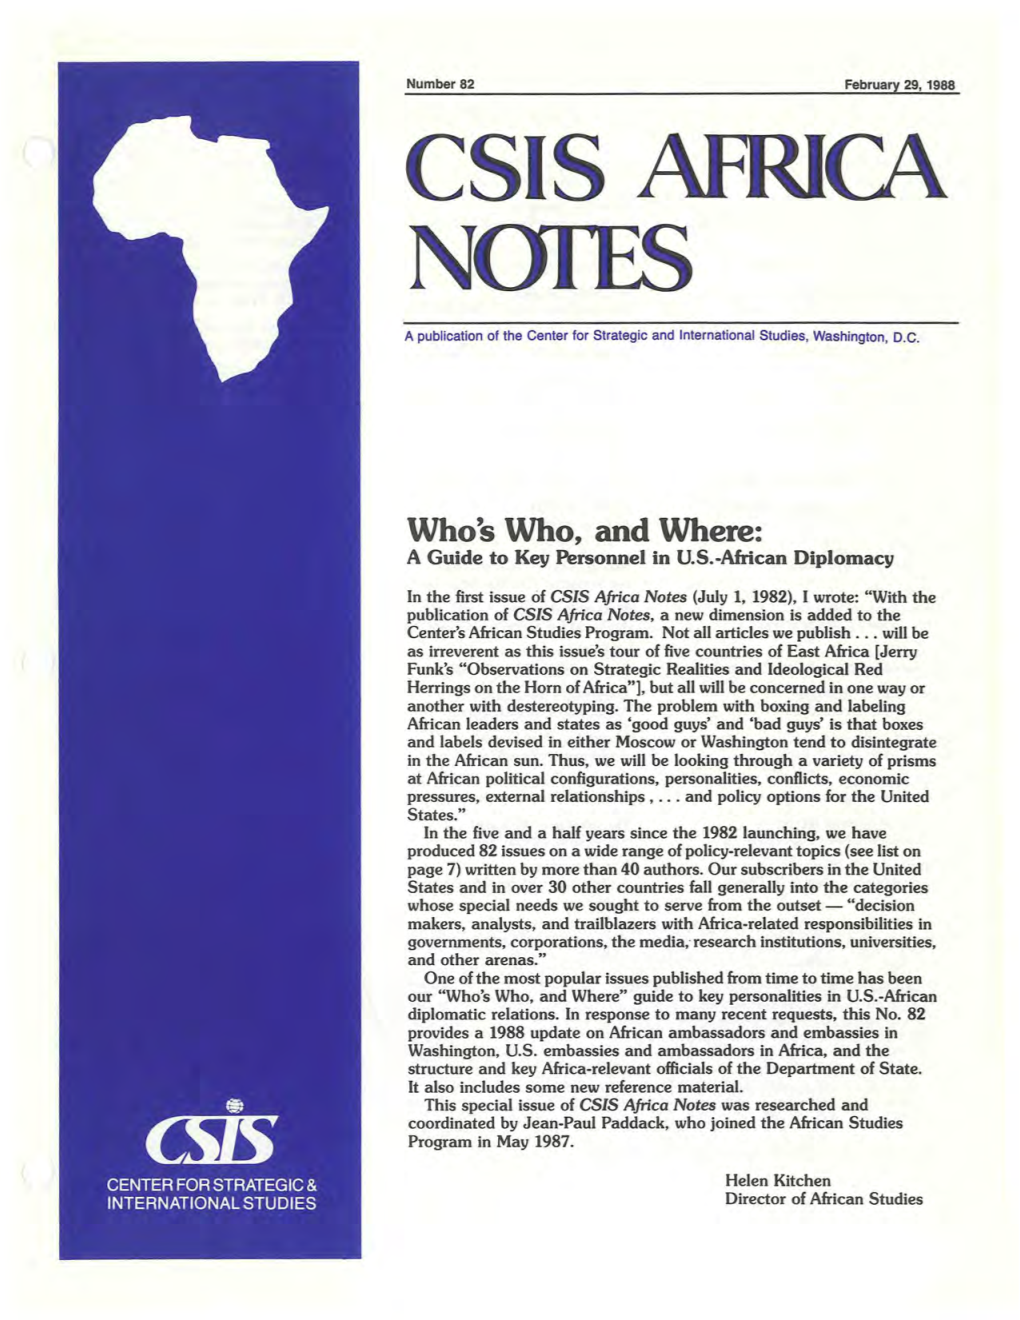 Africa Notes (July 1, 1982), I Wrote: "With the Publication of CSIS Africa Notes, a New Dimension Is Added to the Center's African Studies Program